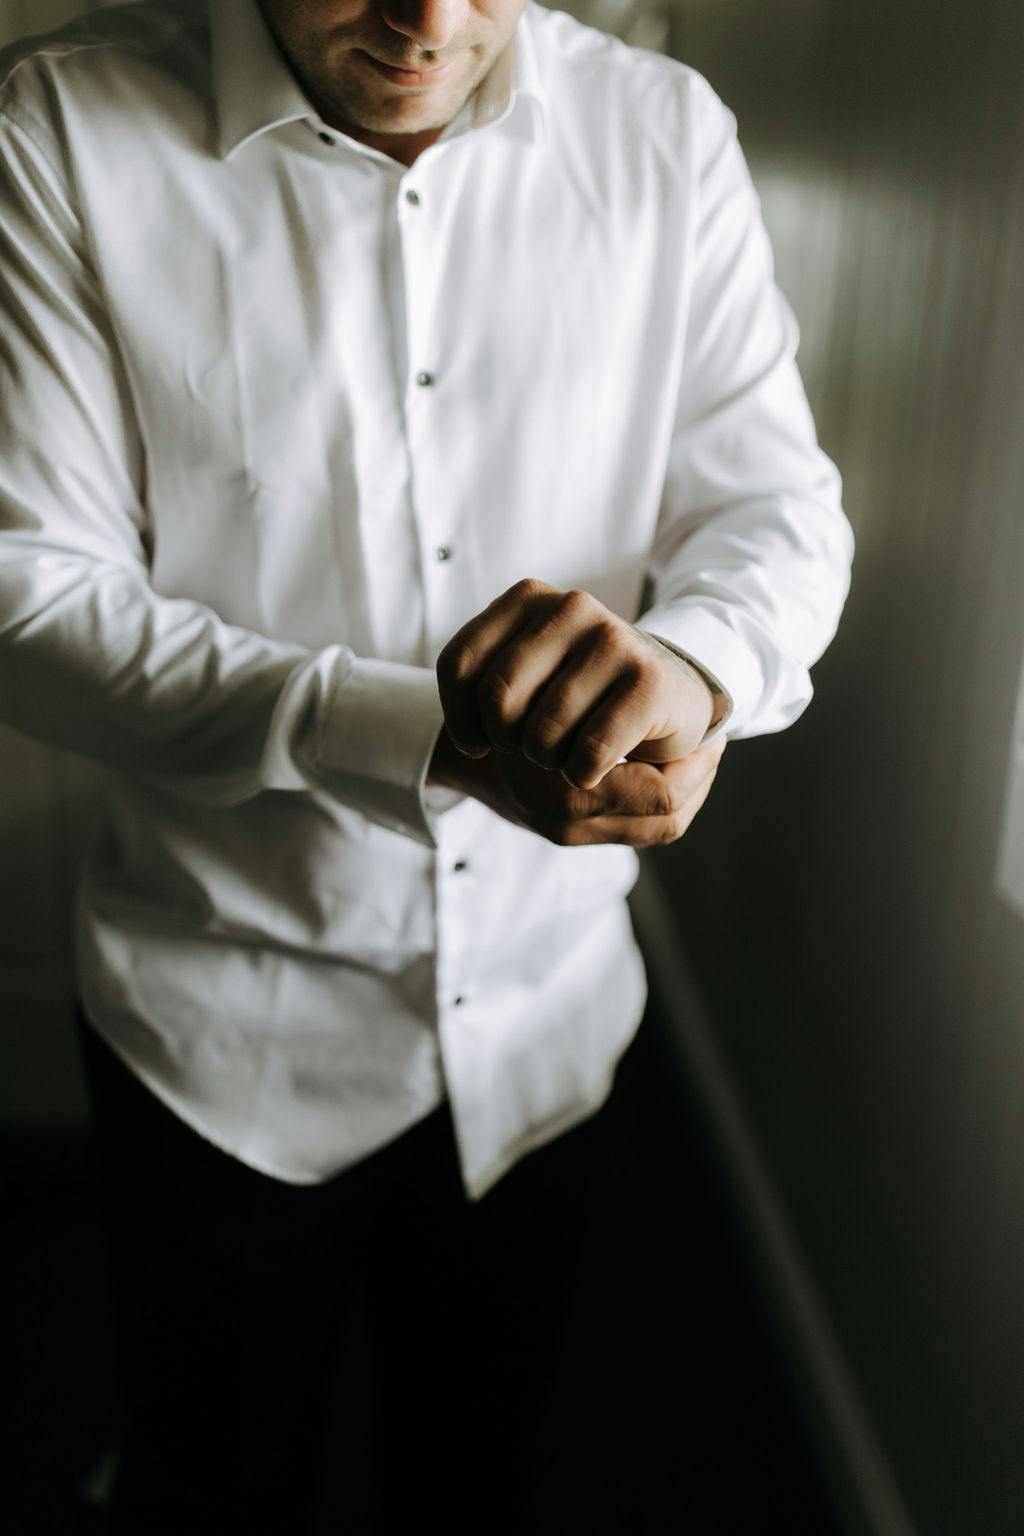 A man in a white dress shirt is adjusting his cufflinks. The focus is on his hands and shirt, with the upper part of his face not visible. He is standing in a room with soft, natural light coming from the right side.